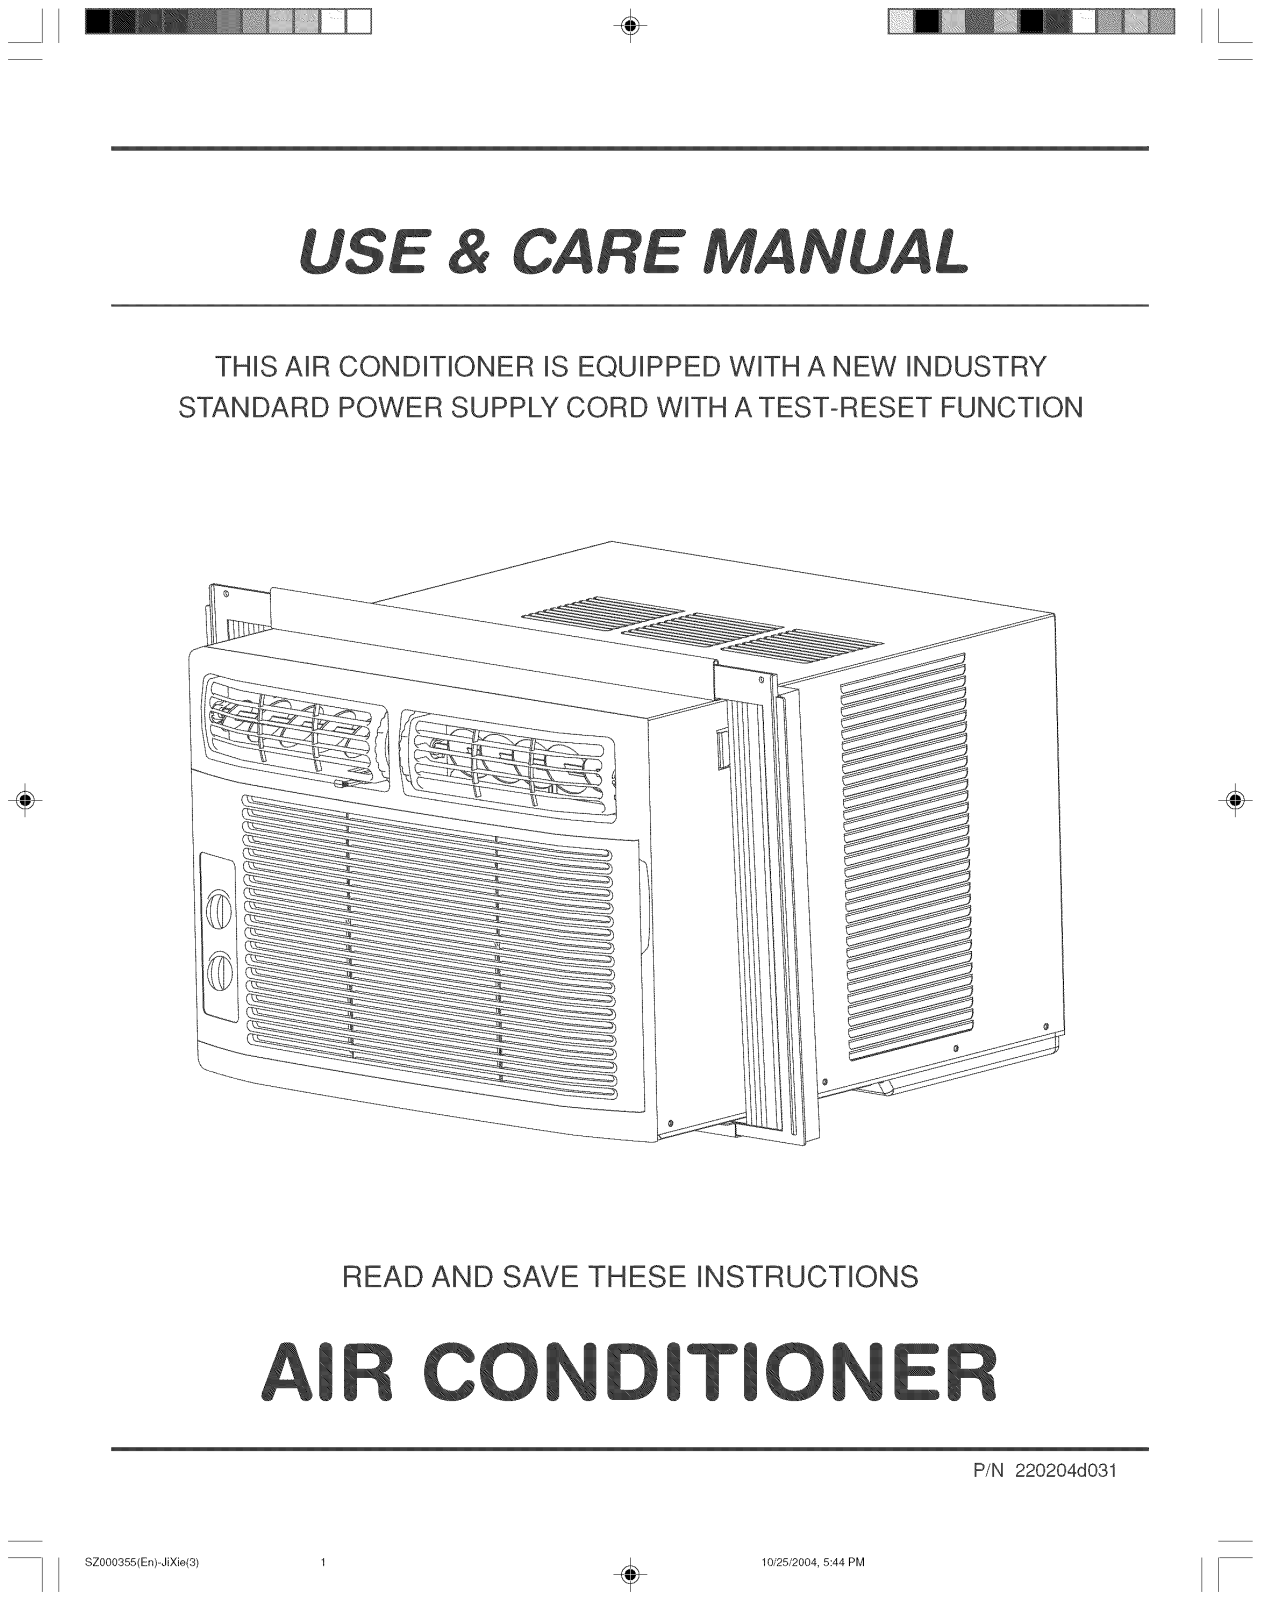 Frigidaire FAA082P7A2, FAA083P7A4, FAA063P7A1, FAA082P7A4, FAA083P7A1 Owner’s Manual